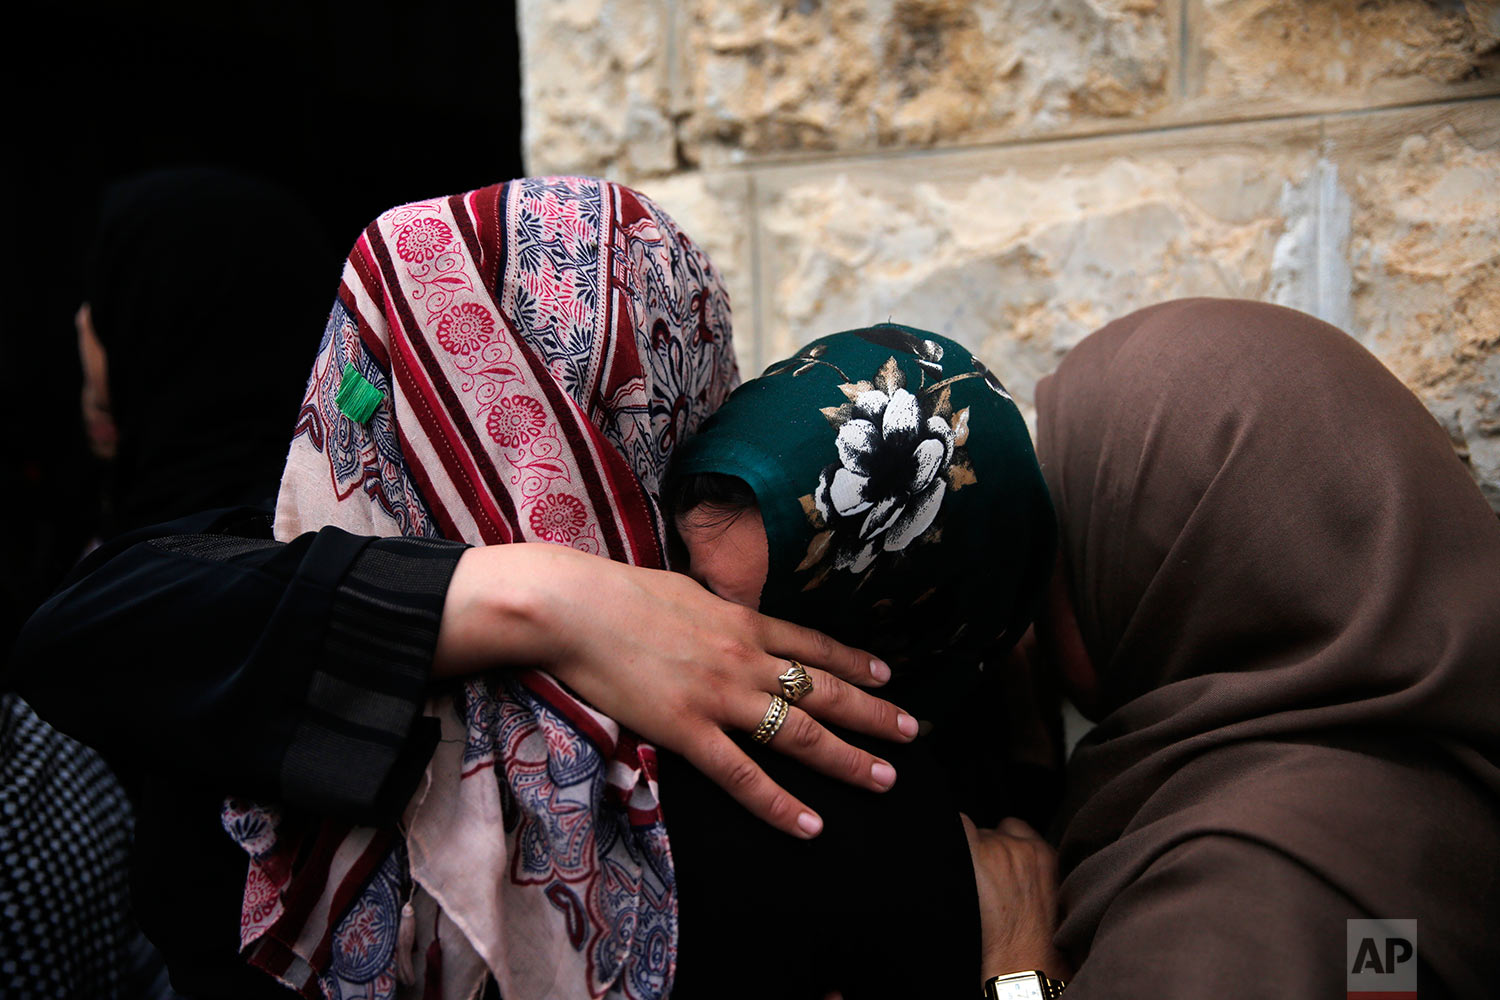 Relatives mourn during the funeral of  Mohammad Jebril in the West Bank village of Tekoa, near Bethlehem, Tuesday, July 11, 2017. Jebril was shot dead Monday after a stabbing attack against Israeli soldiers at Tekoa checkpoint. (AP Photo/Nasser Shiyoukhi).